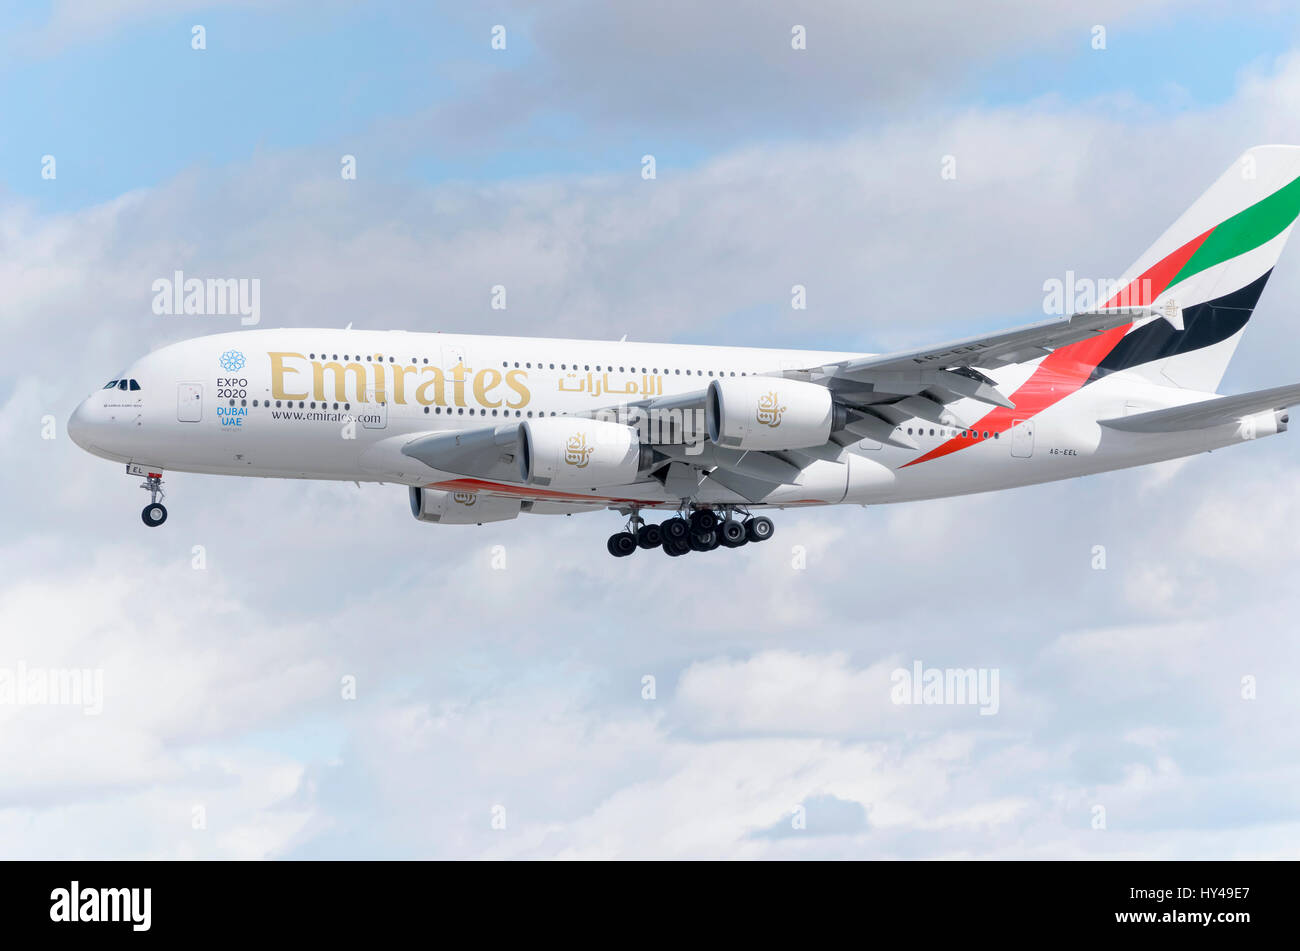 Plane Airbus A380, of Emirates airline, is landing in Madrid - Barajas, Adolfo Suarez airport. It's the world's largest passenger airliner. Clouds. Stock Photo